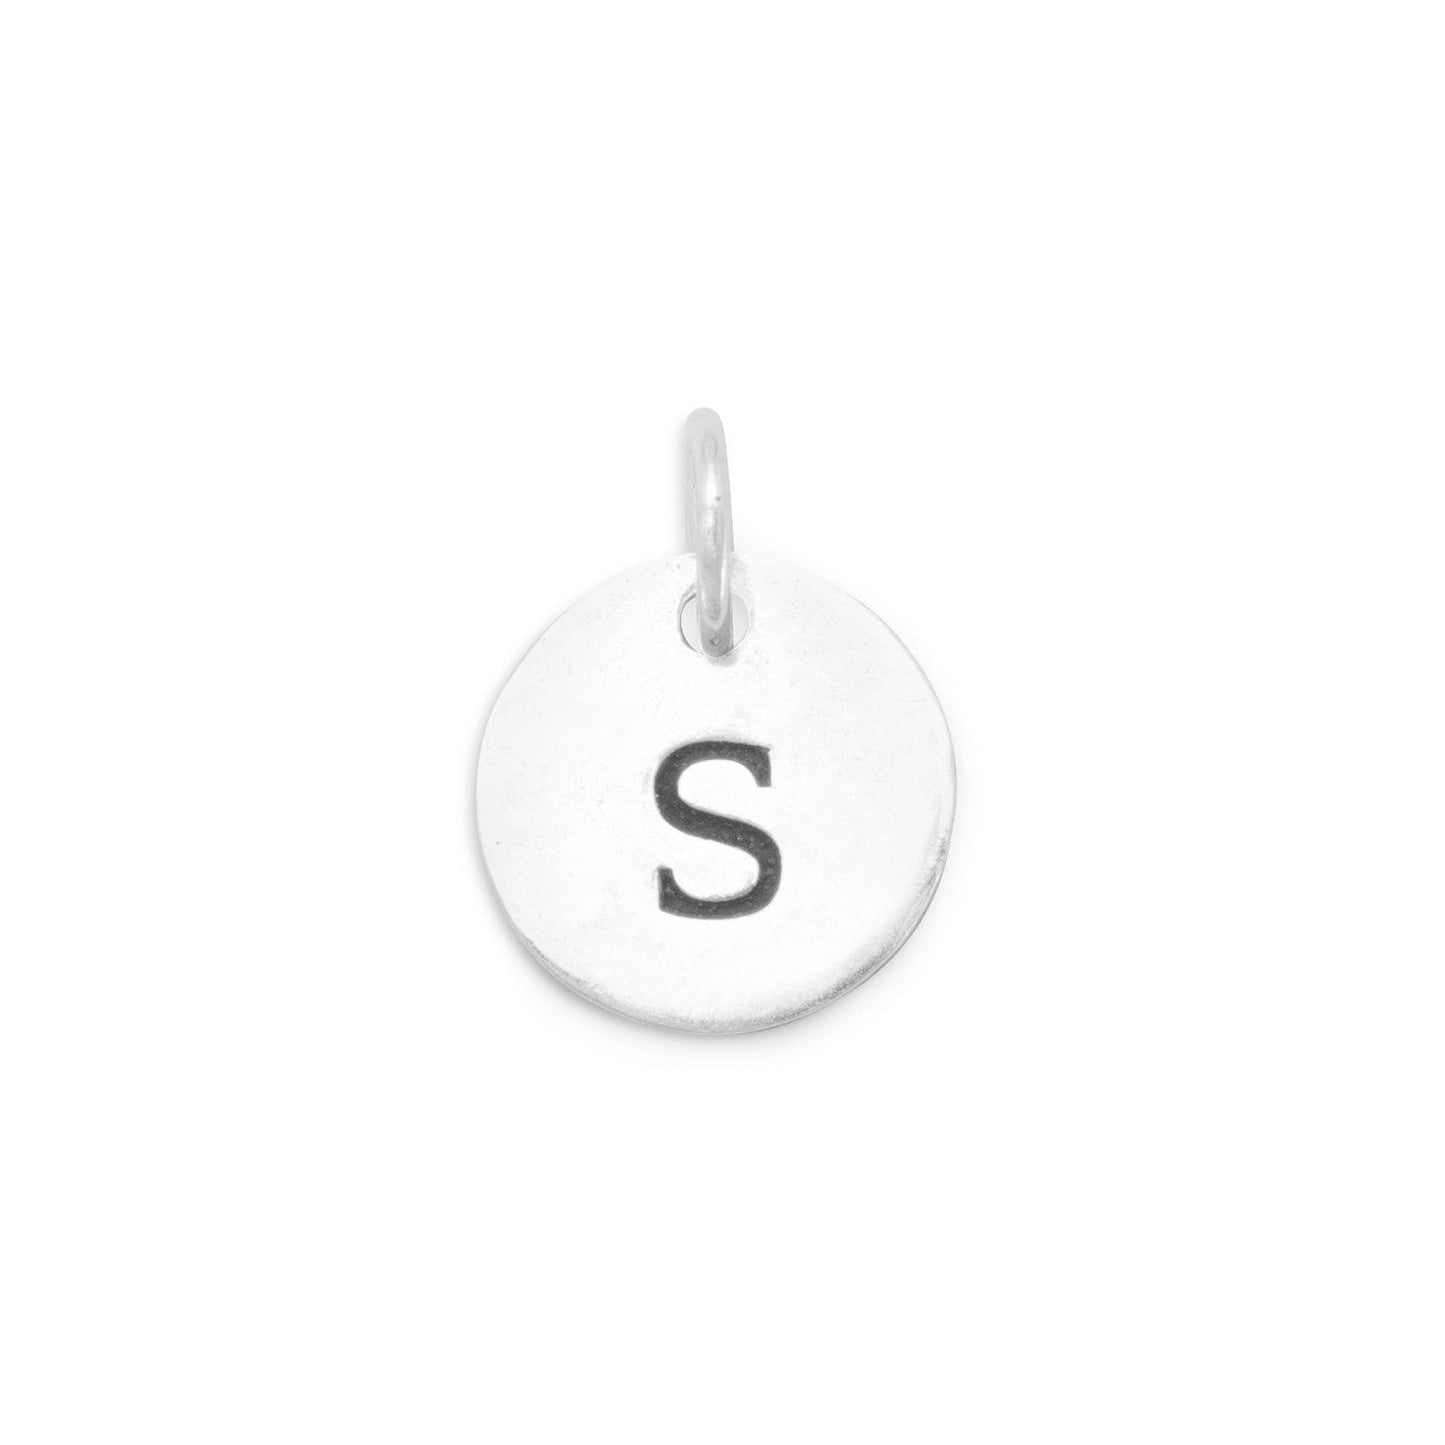 Oxidized Sterling Silver Initial "S" Charm, Made in USA